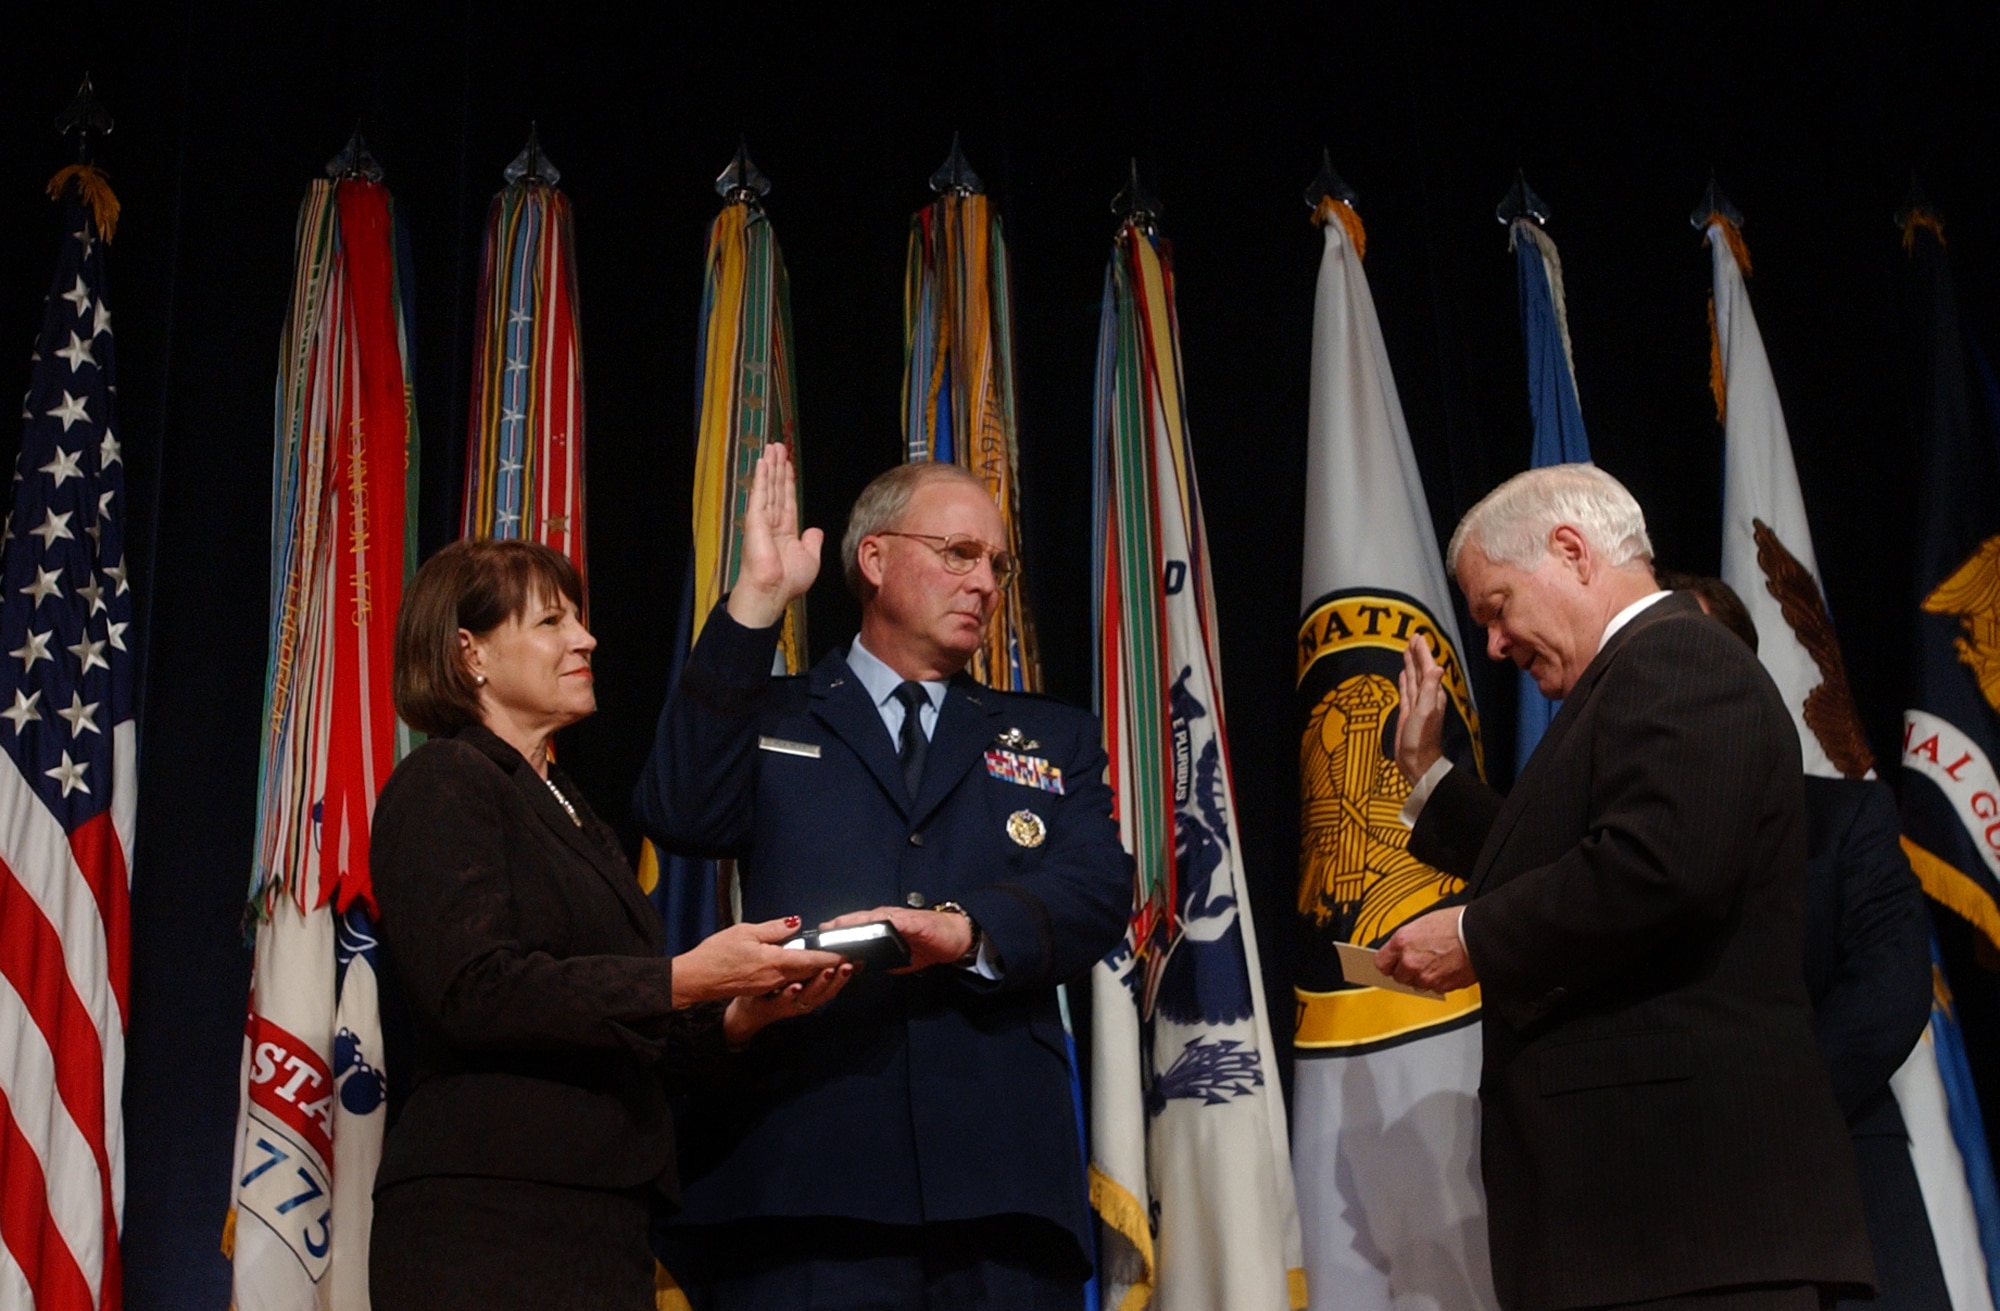 As his wife Cheryl McKinley holds a bible, Air Force Gen. Craig R. McKinley is sworn in by Secretary of Defense Robert Gates as the 26th chief of the National Guard Bureau during a ceremony at the Pentagon, where he was also promoted to his current rank, Monday, Nov. 17, 2008. McKinley is the first Guard officer to be promoted to the four-star rank. (U.S. Army photo by Staff Sgt. Jon Soucy) (Released)